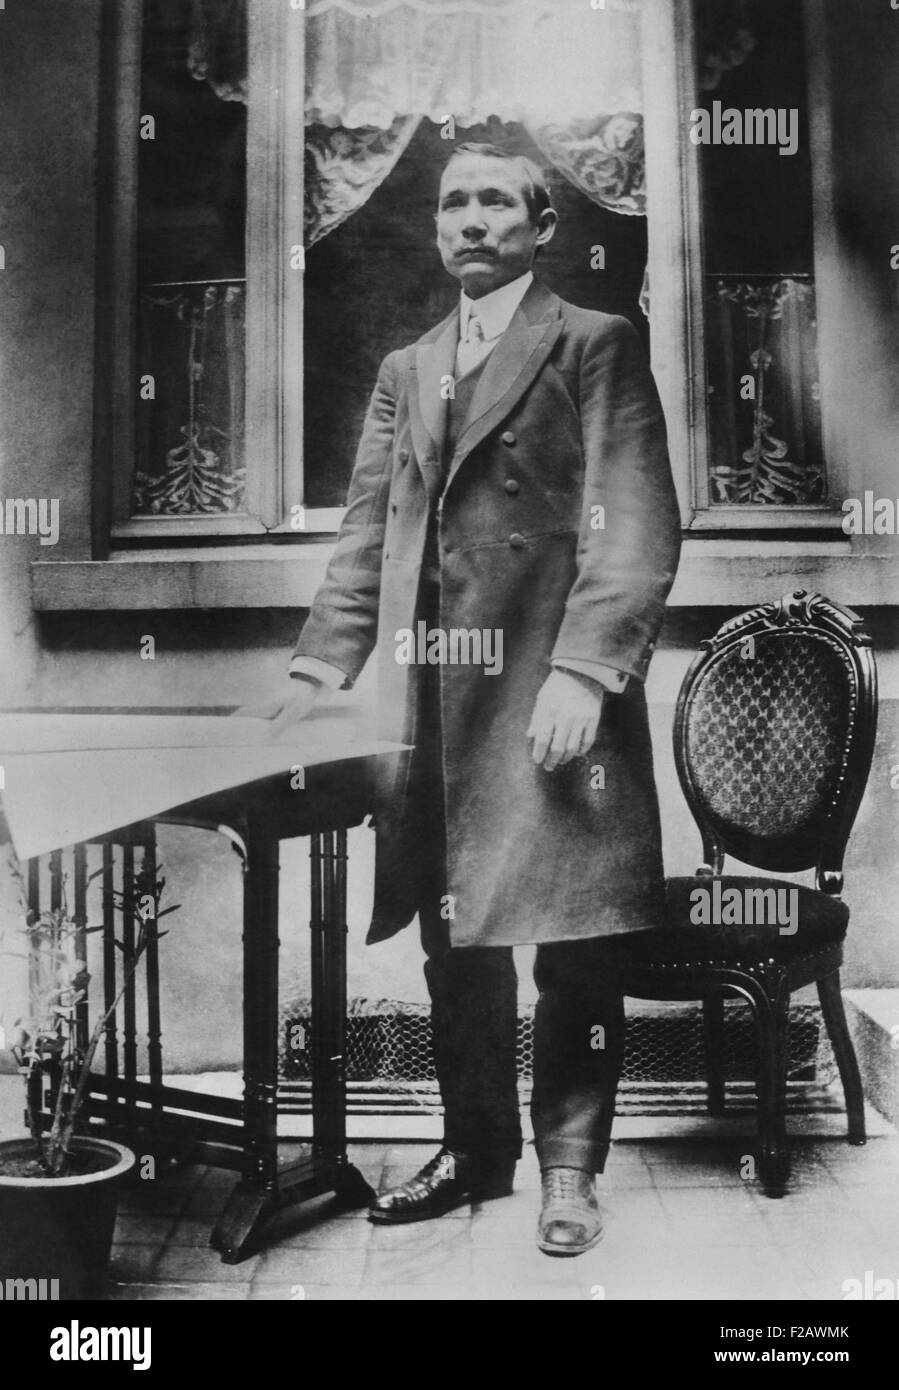 Dr. Sun Yat-Sen, as Provisional President of the Republic of China, Jan. 1, 1912 to March 10, 1912. Yuan Shikai, who controlled Stock Photo